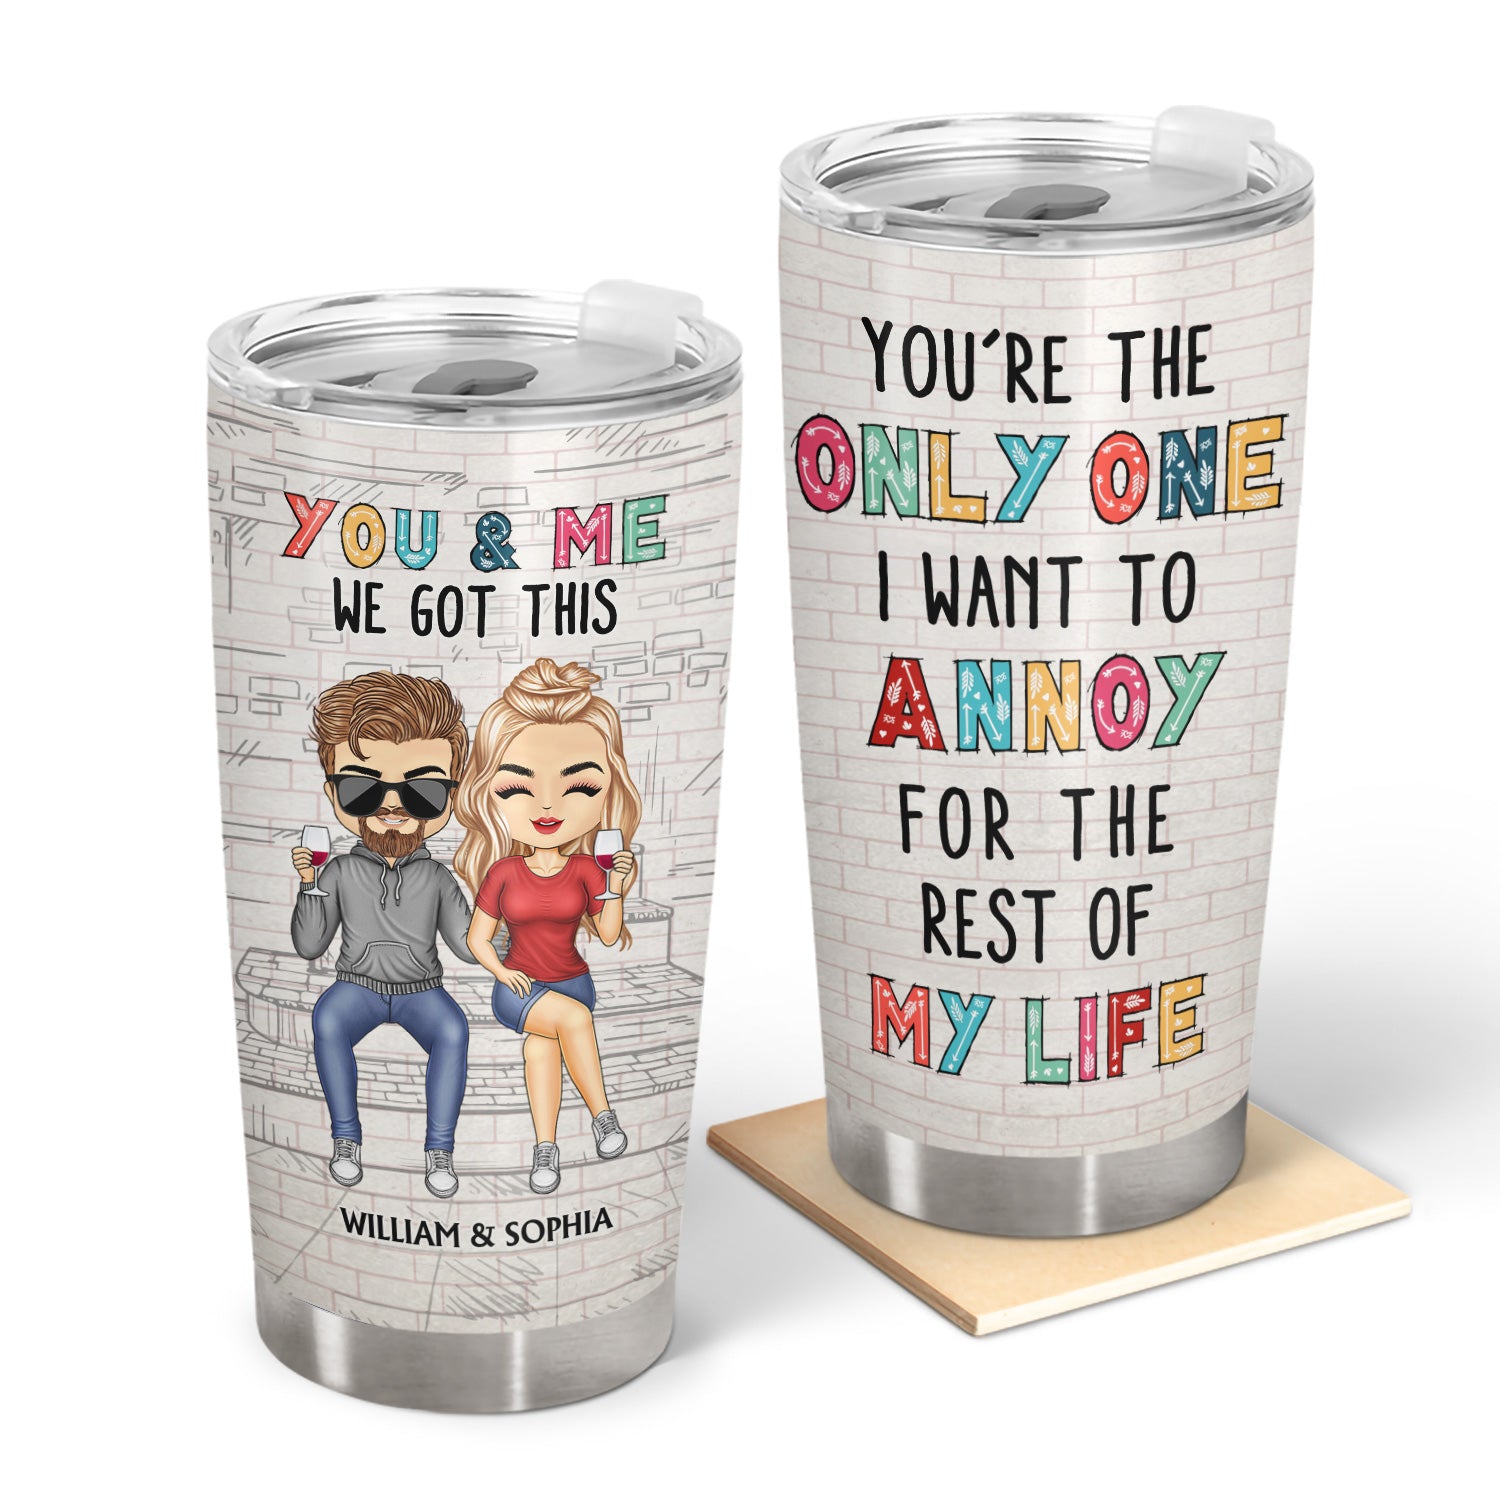 You're The Only One I Want To Annoy For The Rest Of My Life Couples Colorful - Anniversary, Birthday Gift For Spouse, Husband, Wife, Boyfriend, Girlfriend - Personalized Custom Tumbler